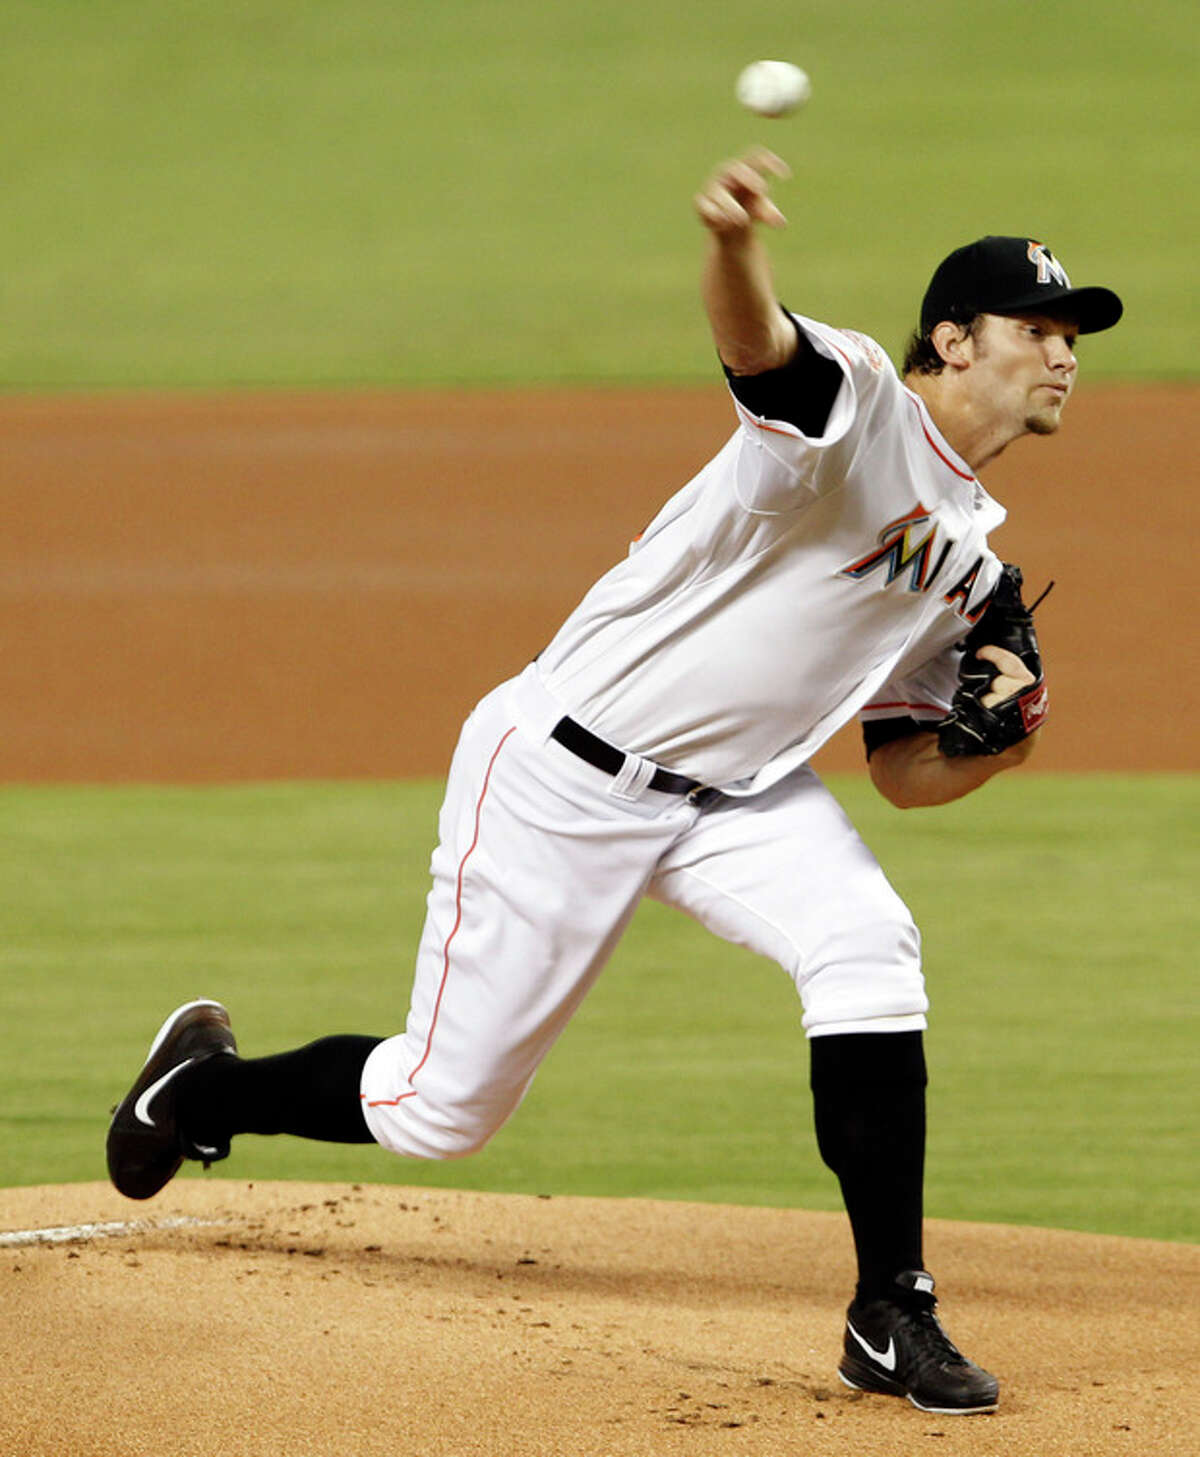 Miami Marlins' Josh Johnson pitches against the New York Mets in the first inning of a baseball game in Miami, Saturday, Sept. 1, 2012. (AP Photo/Alan Diaz)